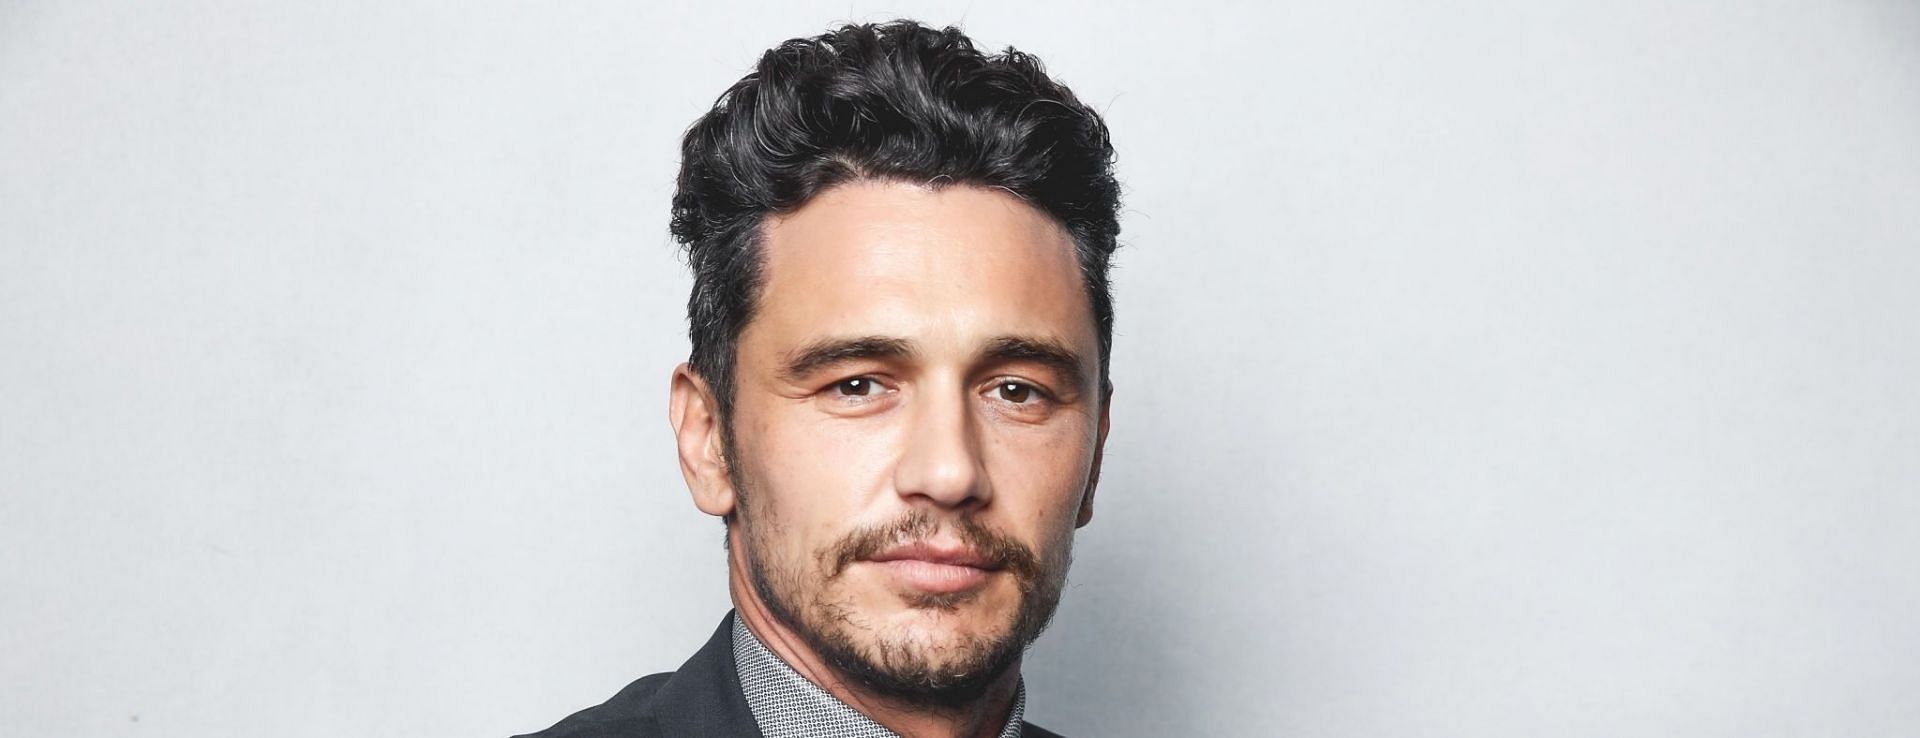 Nearly five women accused James Franco of misconduct and assault in the past (Image via Rich Fury/Getty Images)